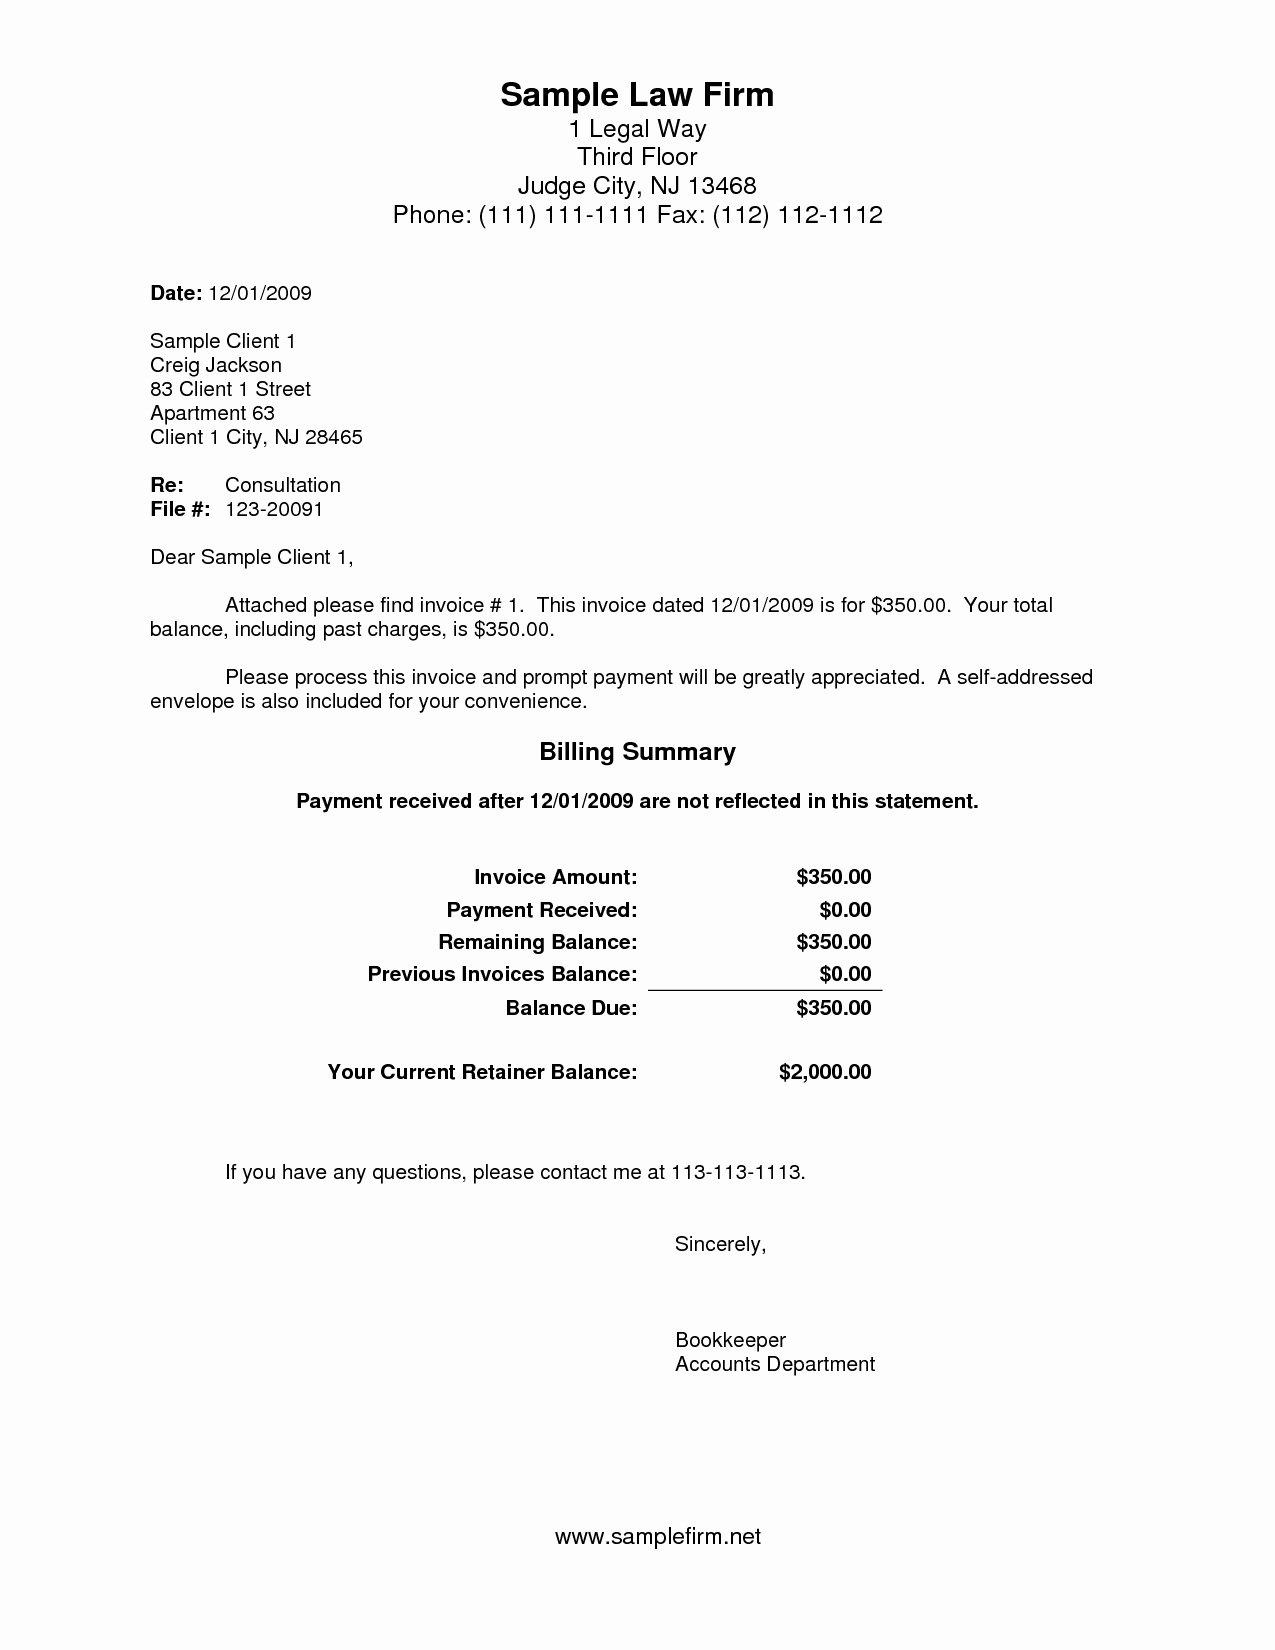 Invoice for Services Rendered Template Elegant Sample Invoices for Services Rendered Invoice Template Ideas